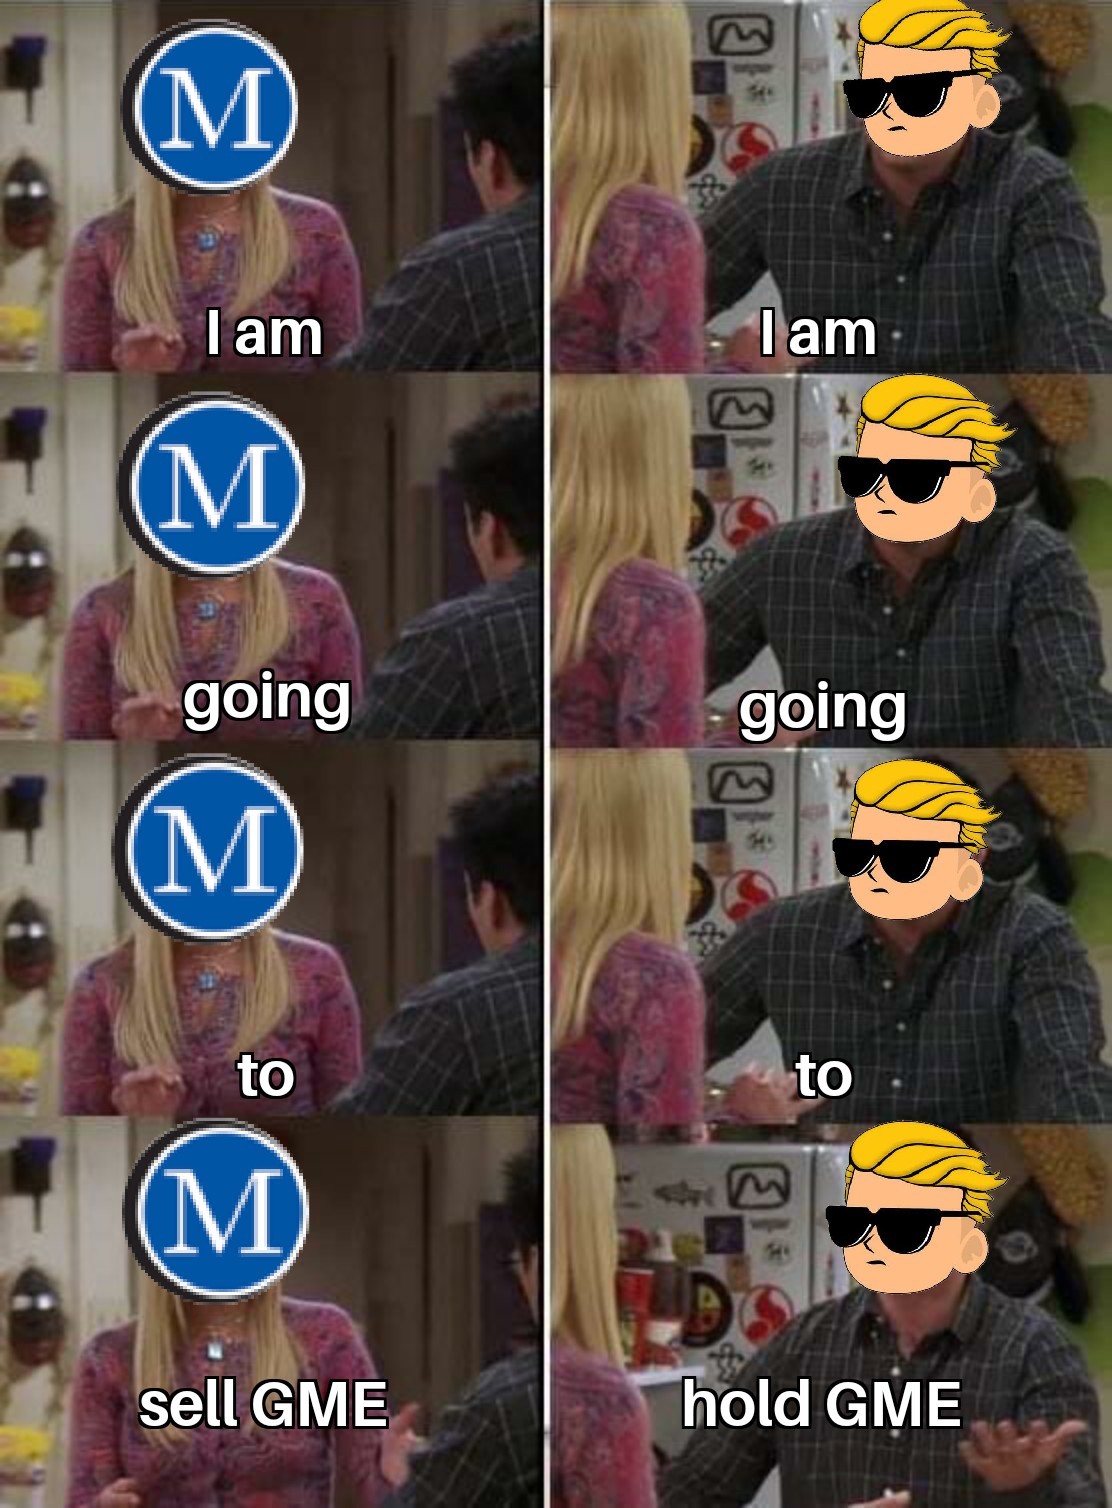 funny memes and pics - joey friends meme template - M I am Tam M going going M to to M sell Gme hold Gme